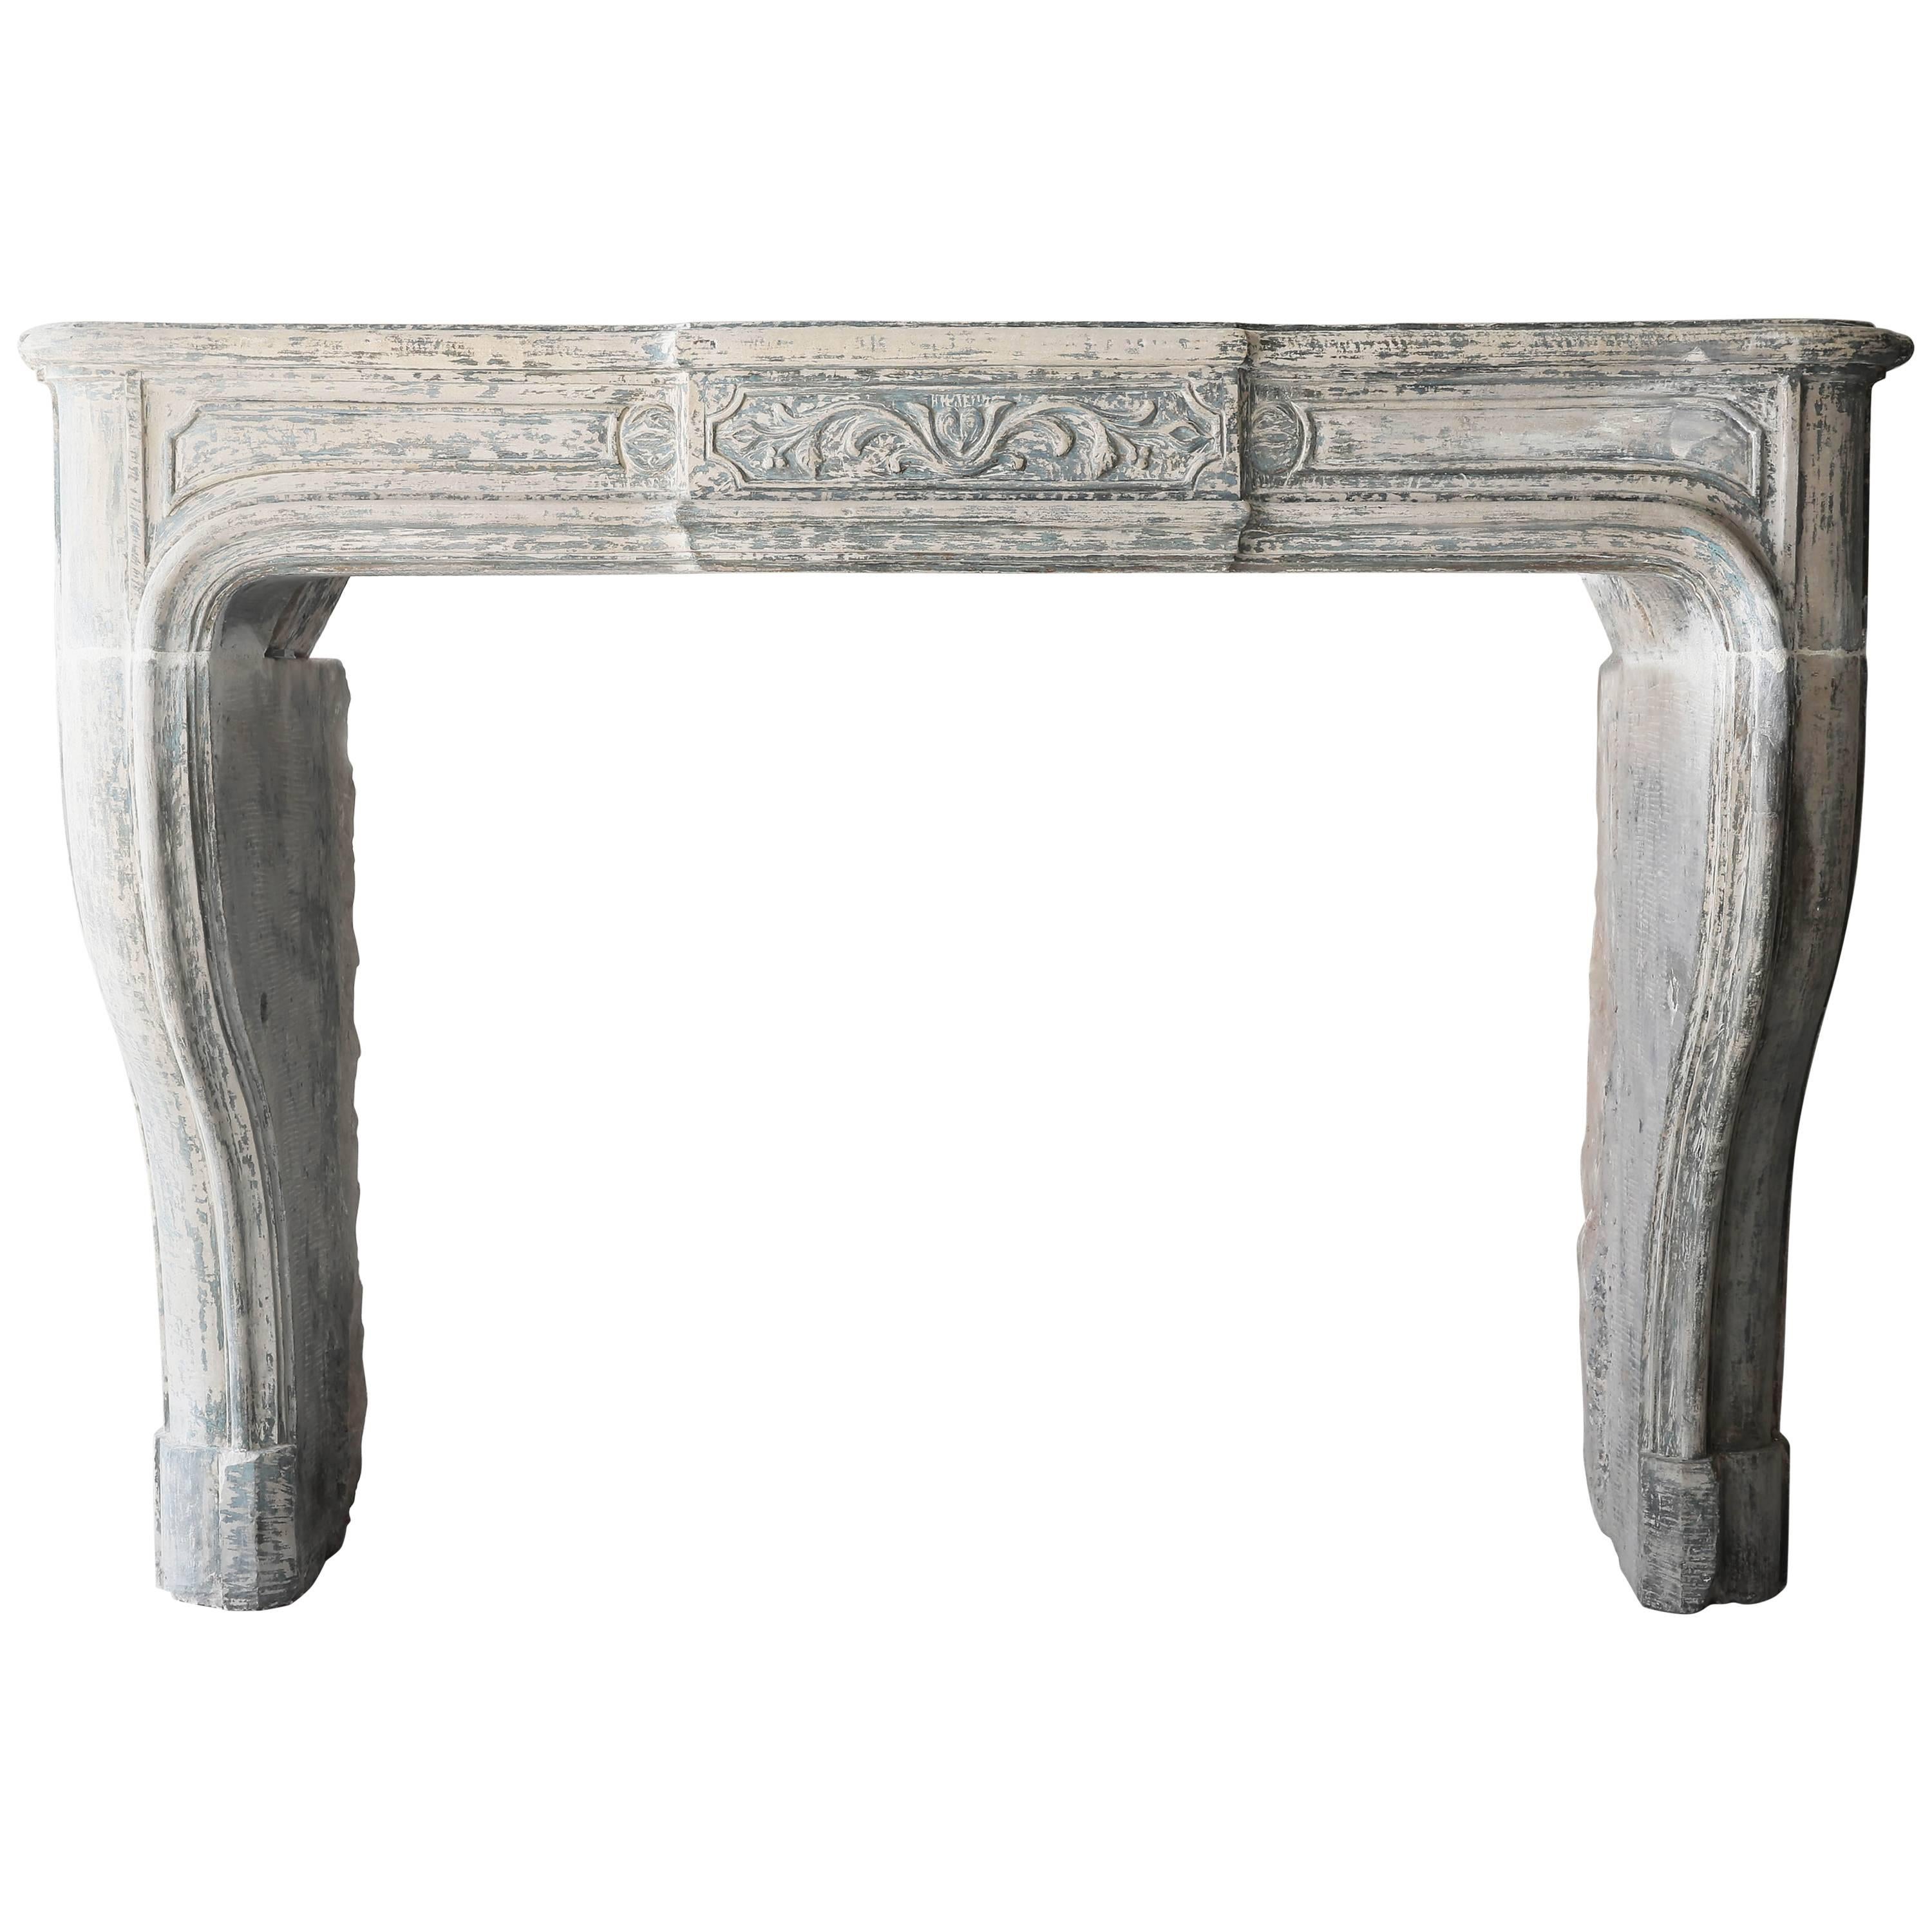 French Antique Fireplace of Limestone